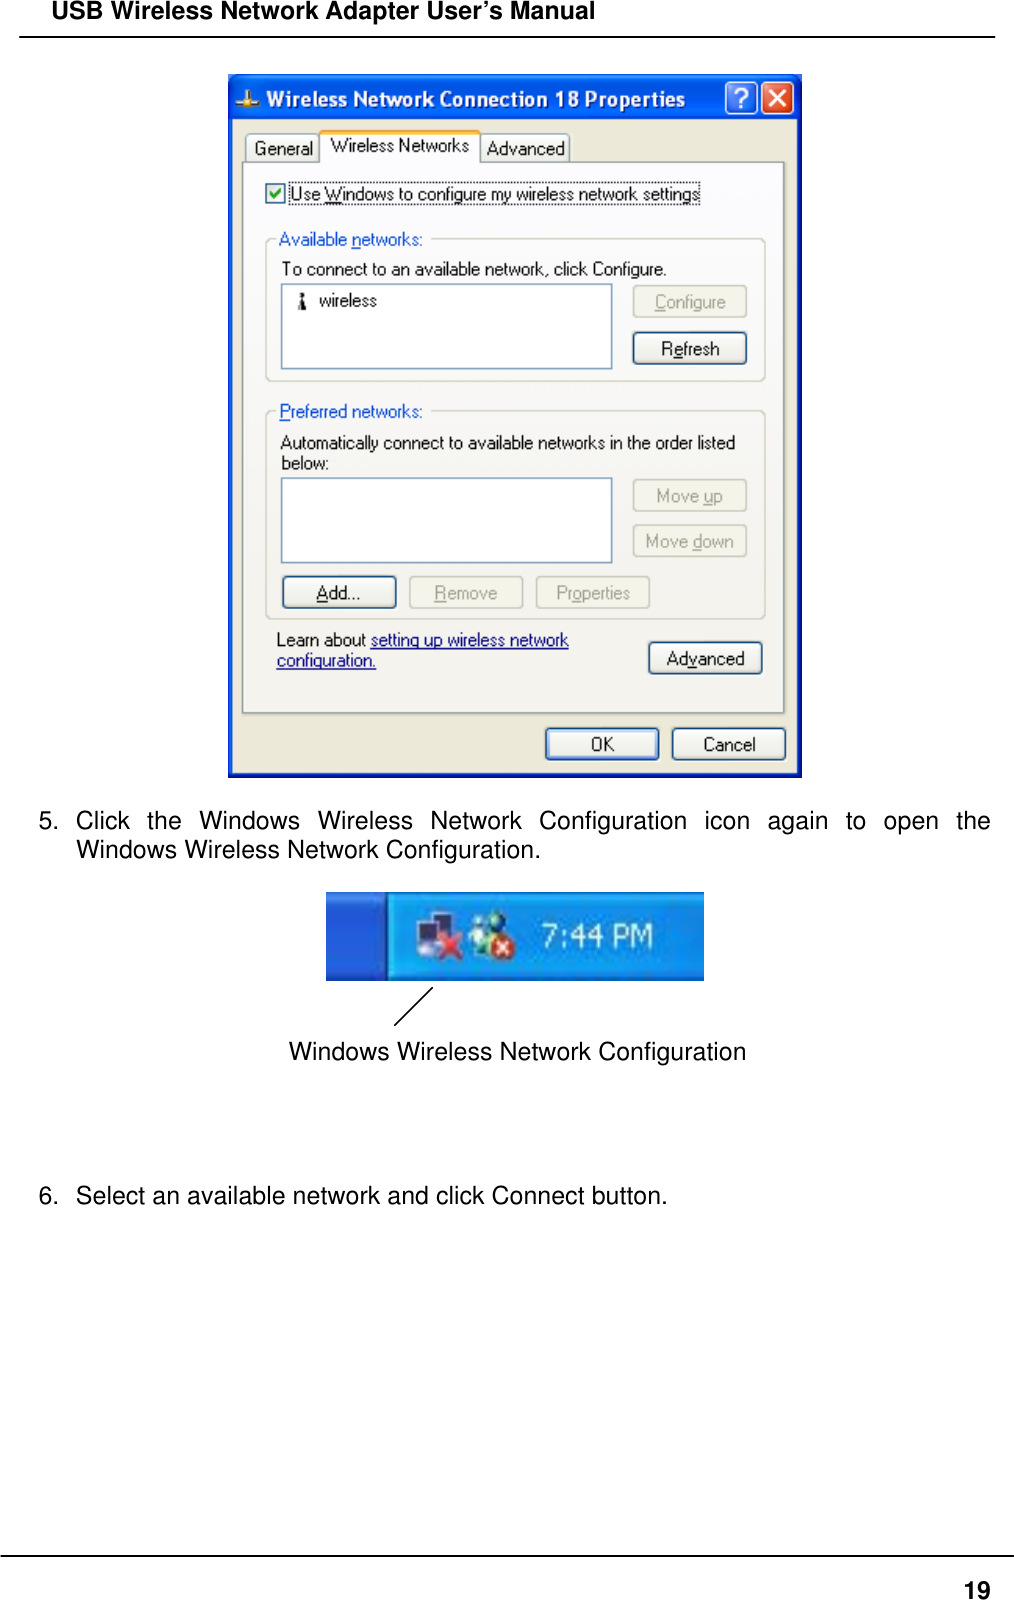   USB Wireless Network Adapter User’s Manual   5. Click the Windows Wireless Network Configuration icon again to open the Windows Wireless Network Configuration.     Windows Wireless Network Configuration     6.  Select an available network and click Connect button.   19